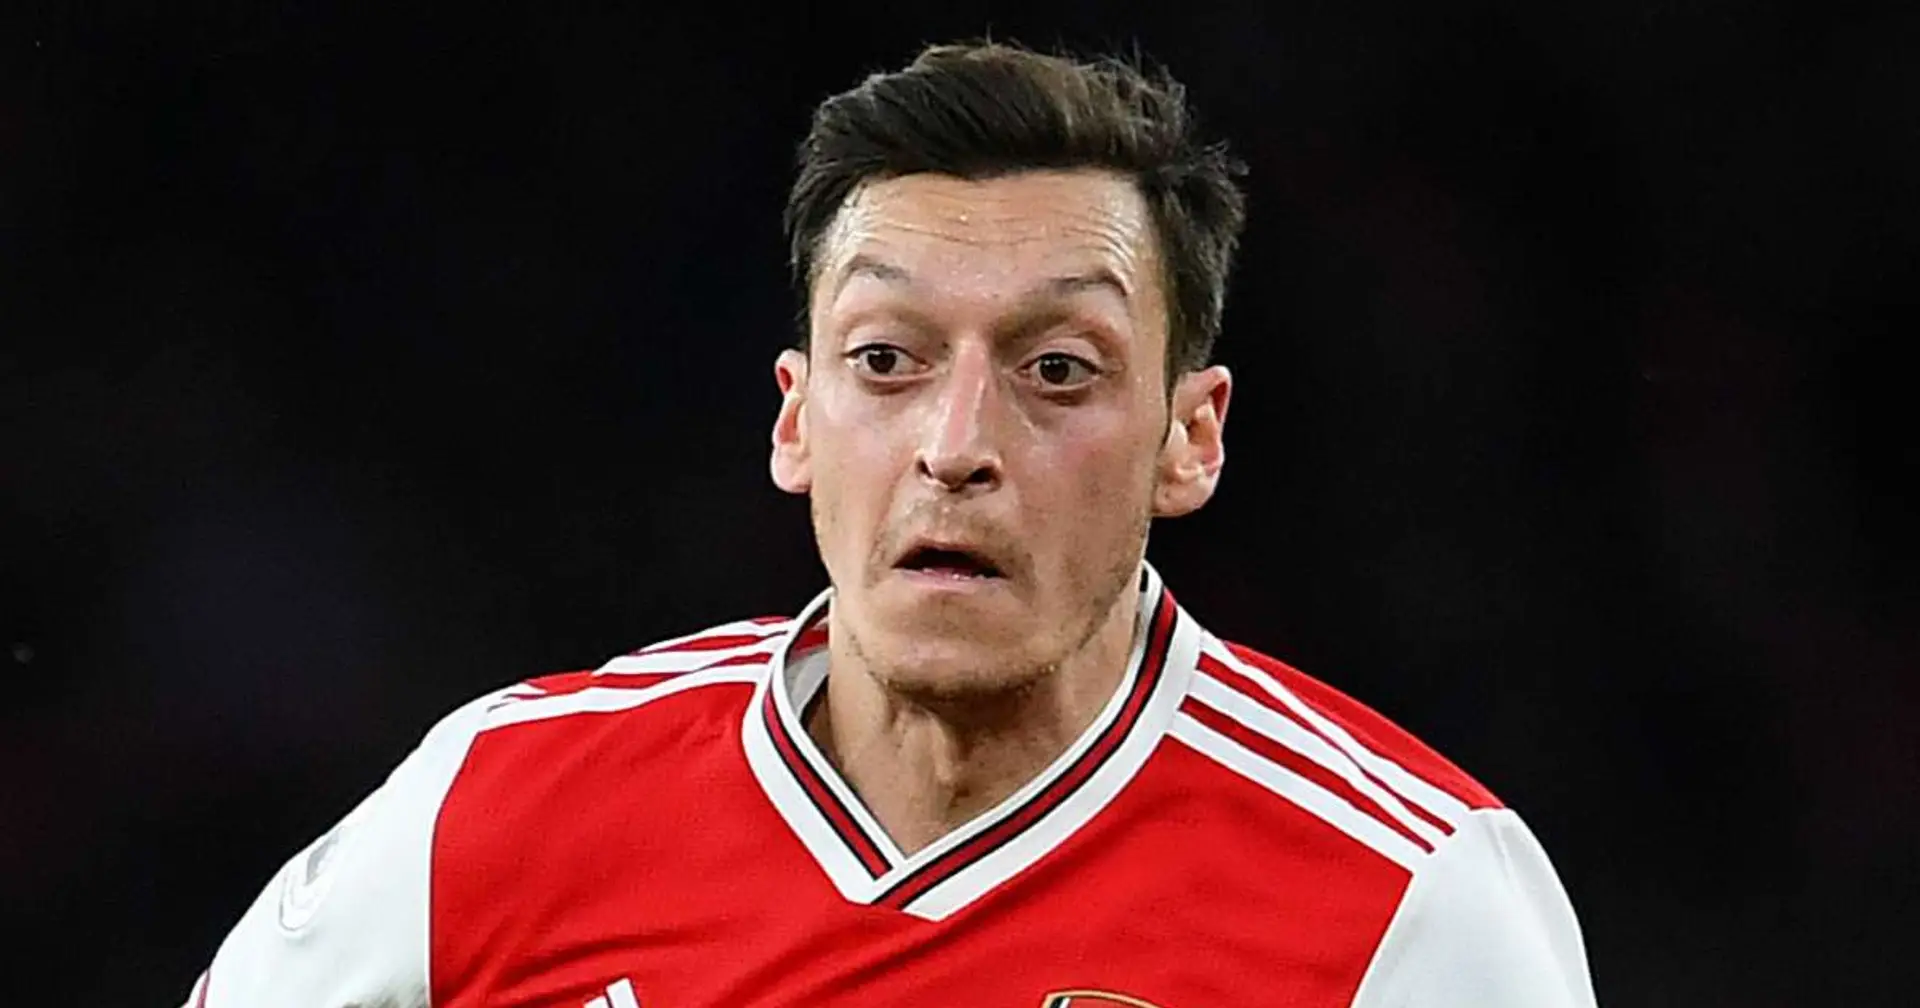 Mesut Ozil ready to waive part of salary Arsenal due to pay him until summer to secure January move to Fenerbahce (reliability: 5 stars)